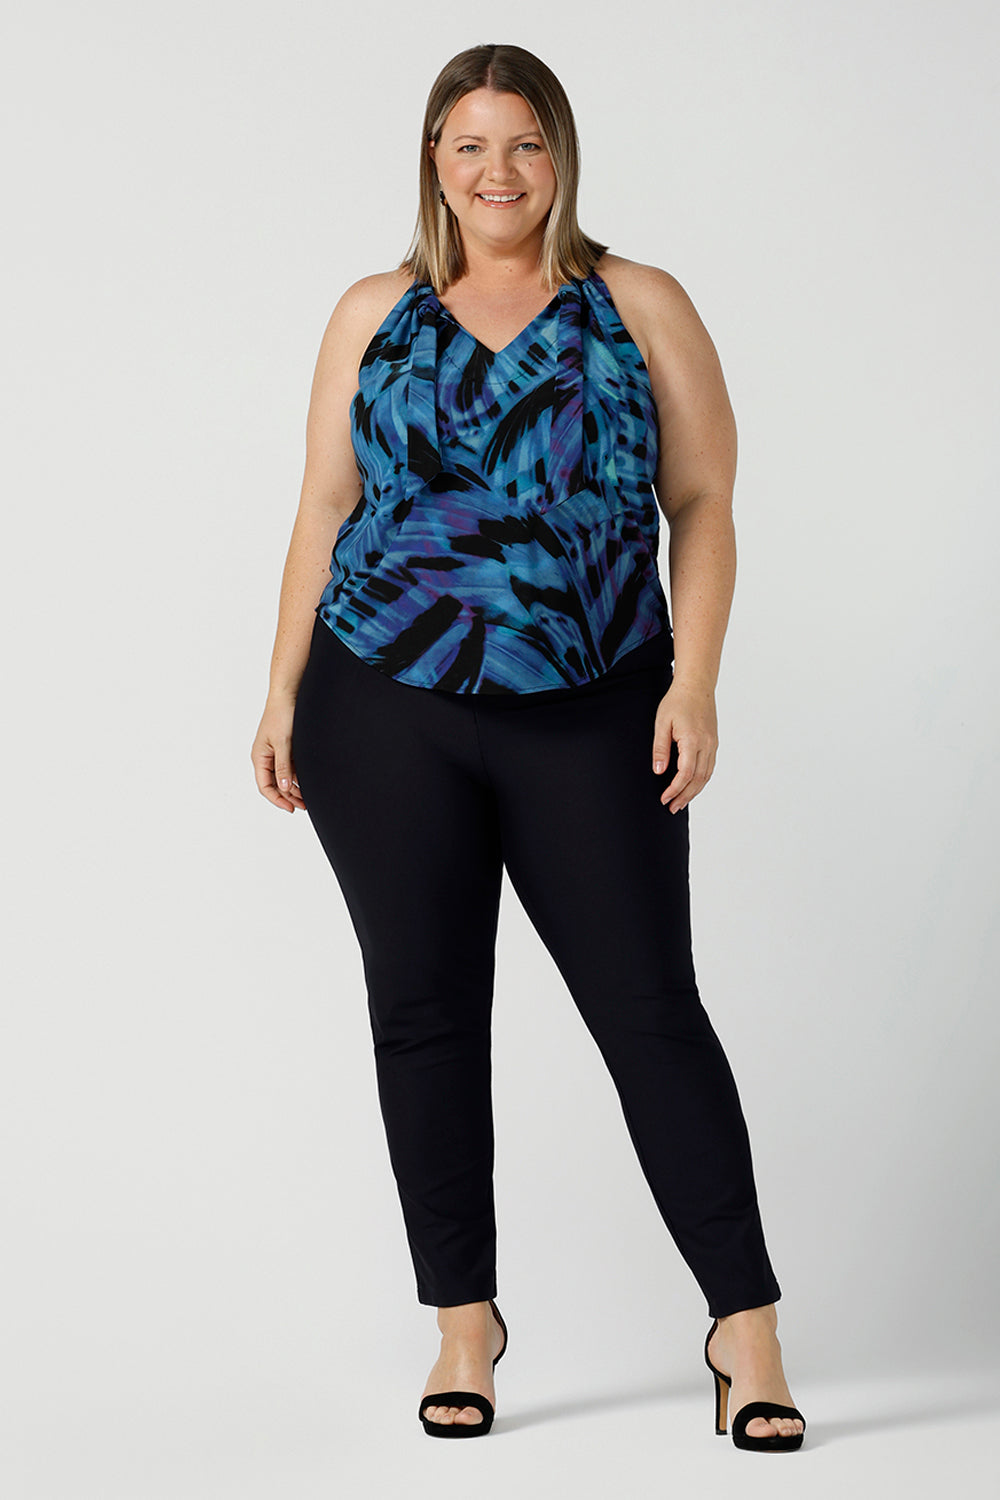 Curvy woman wearing a size 18 tie neck tie top Iris in Flutter with a blue digital print. Size inclusive clothes for women size 8 - 24. Digital blue and purple print. Made in Australia. Styled back with navy slim fit Brooklyn pant.